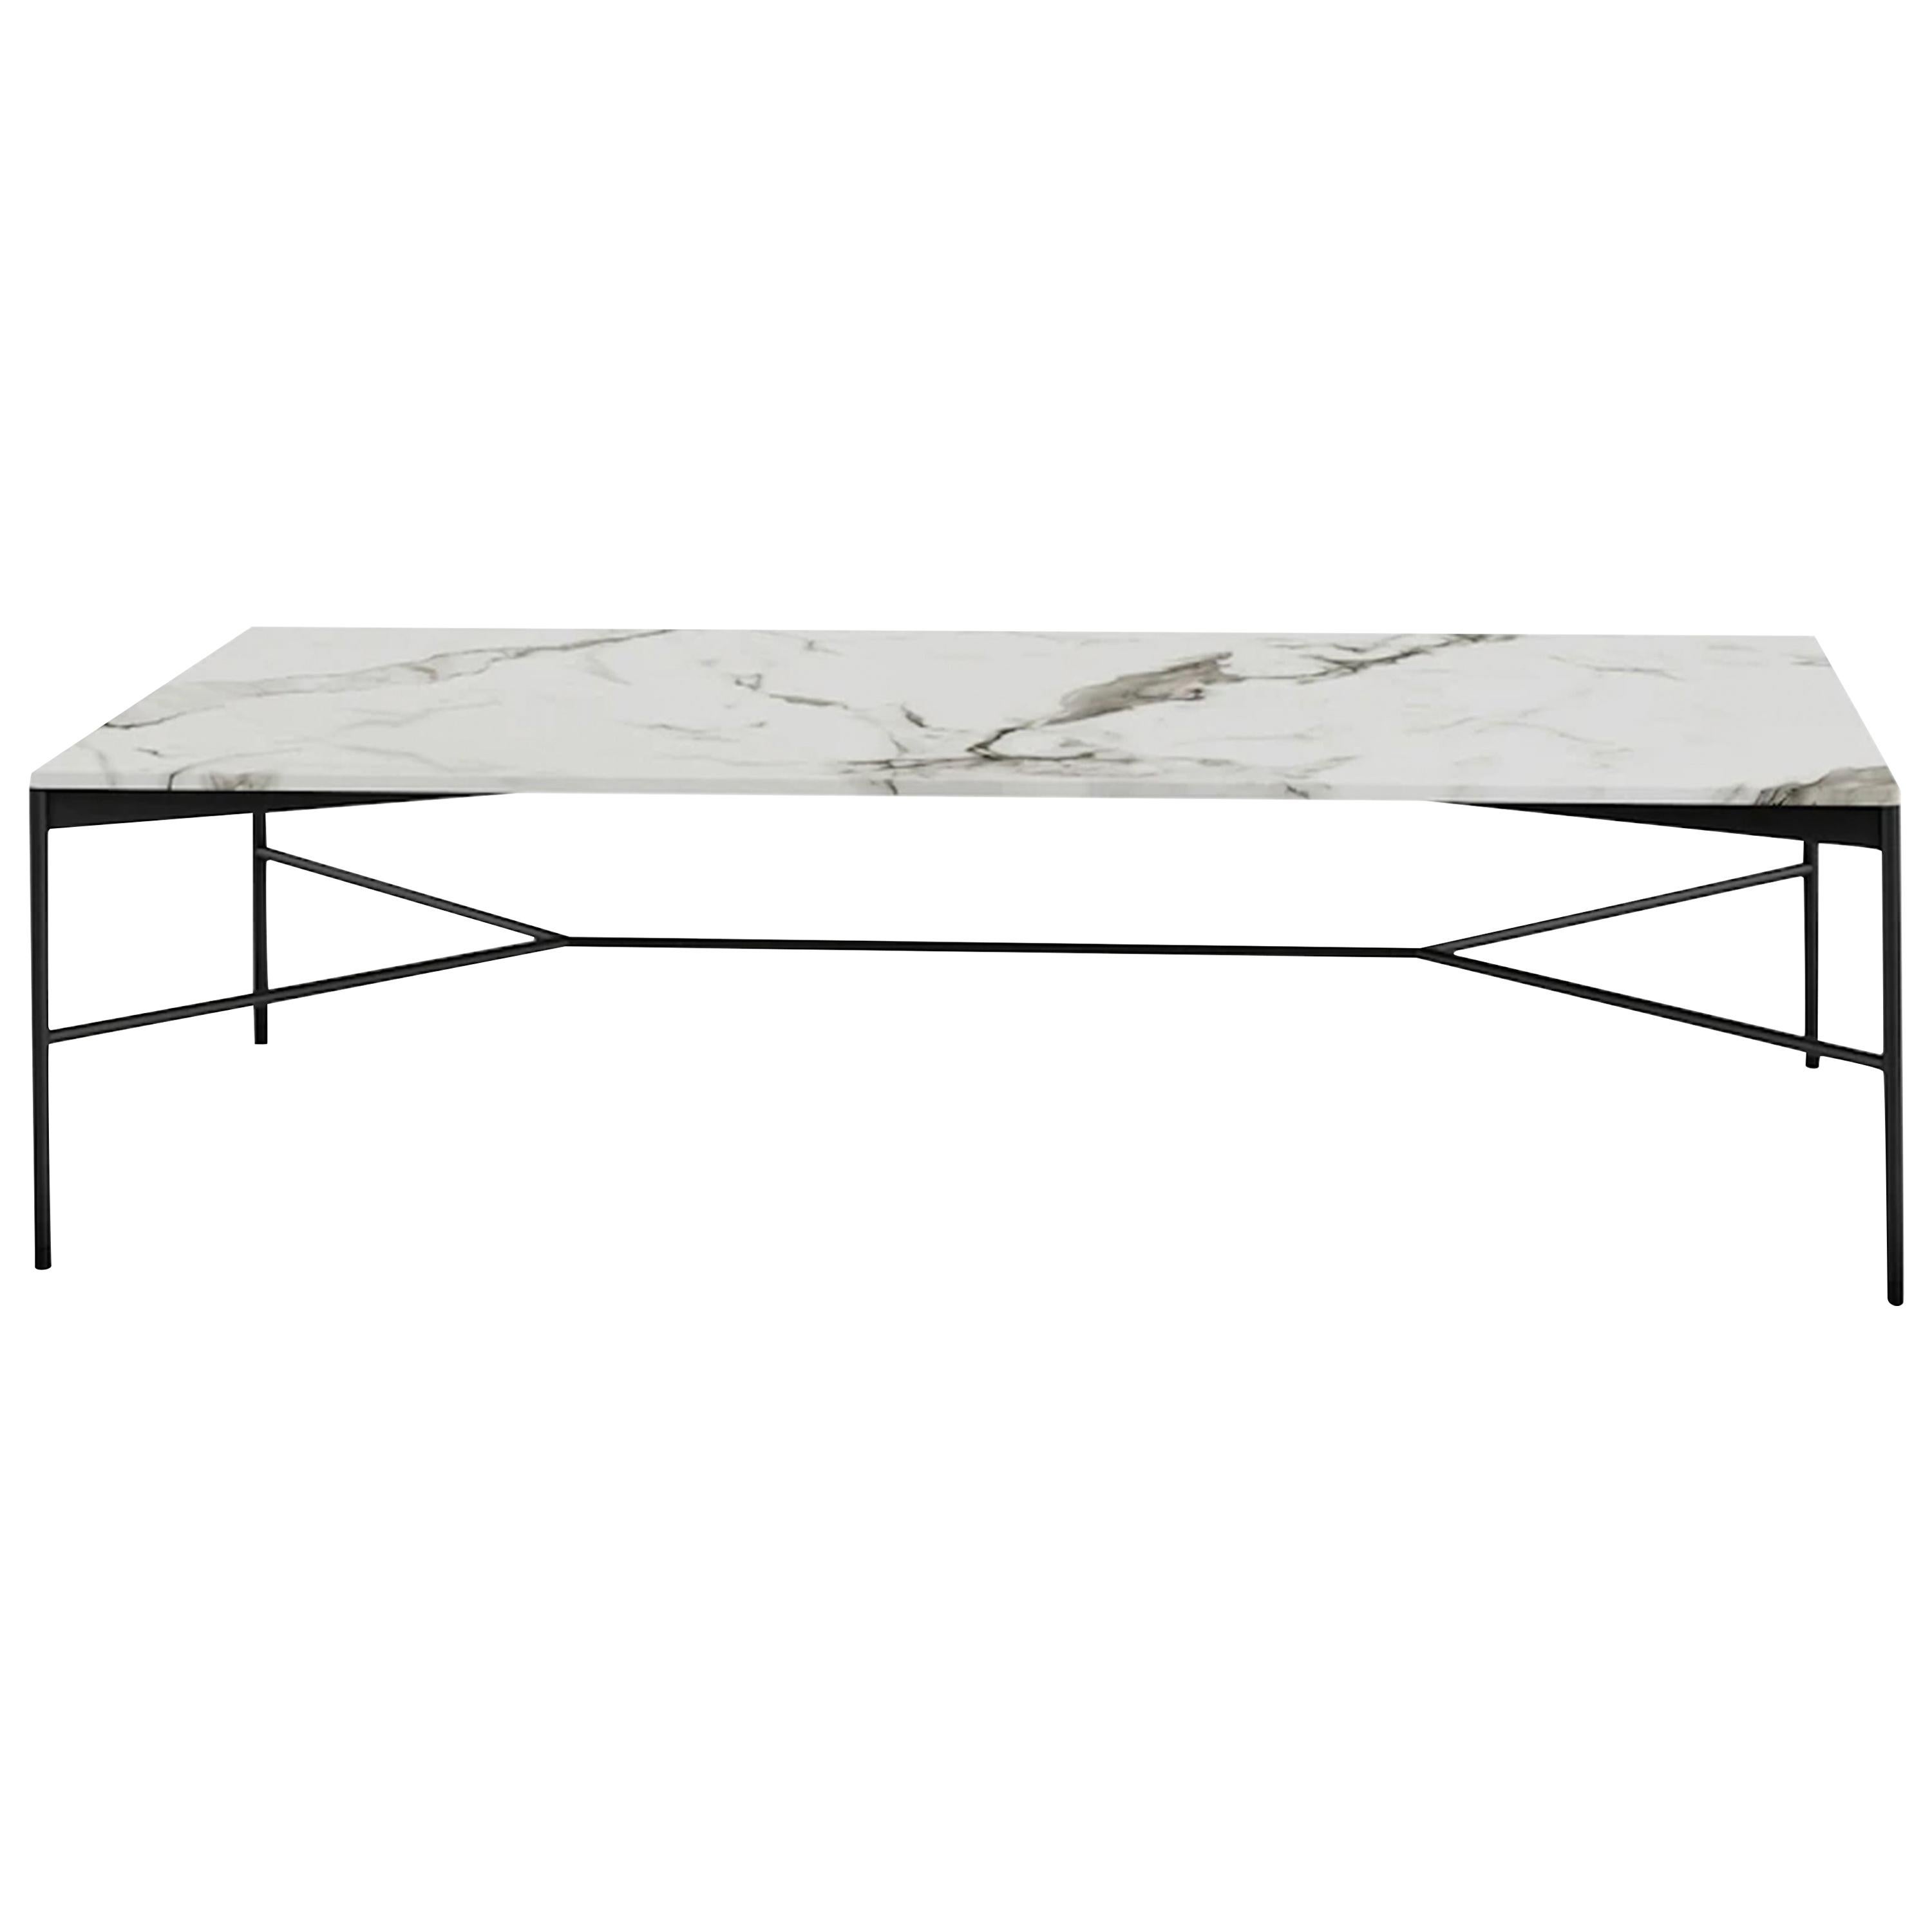 Tacchini Chill-Out Marble Coffee Table Designed by Gordon Guillaumier